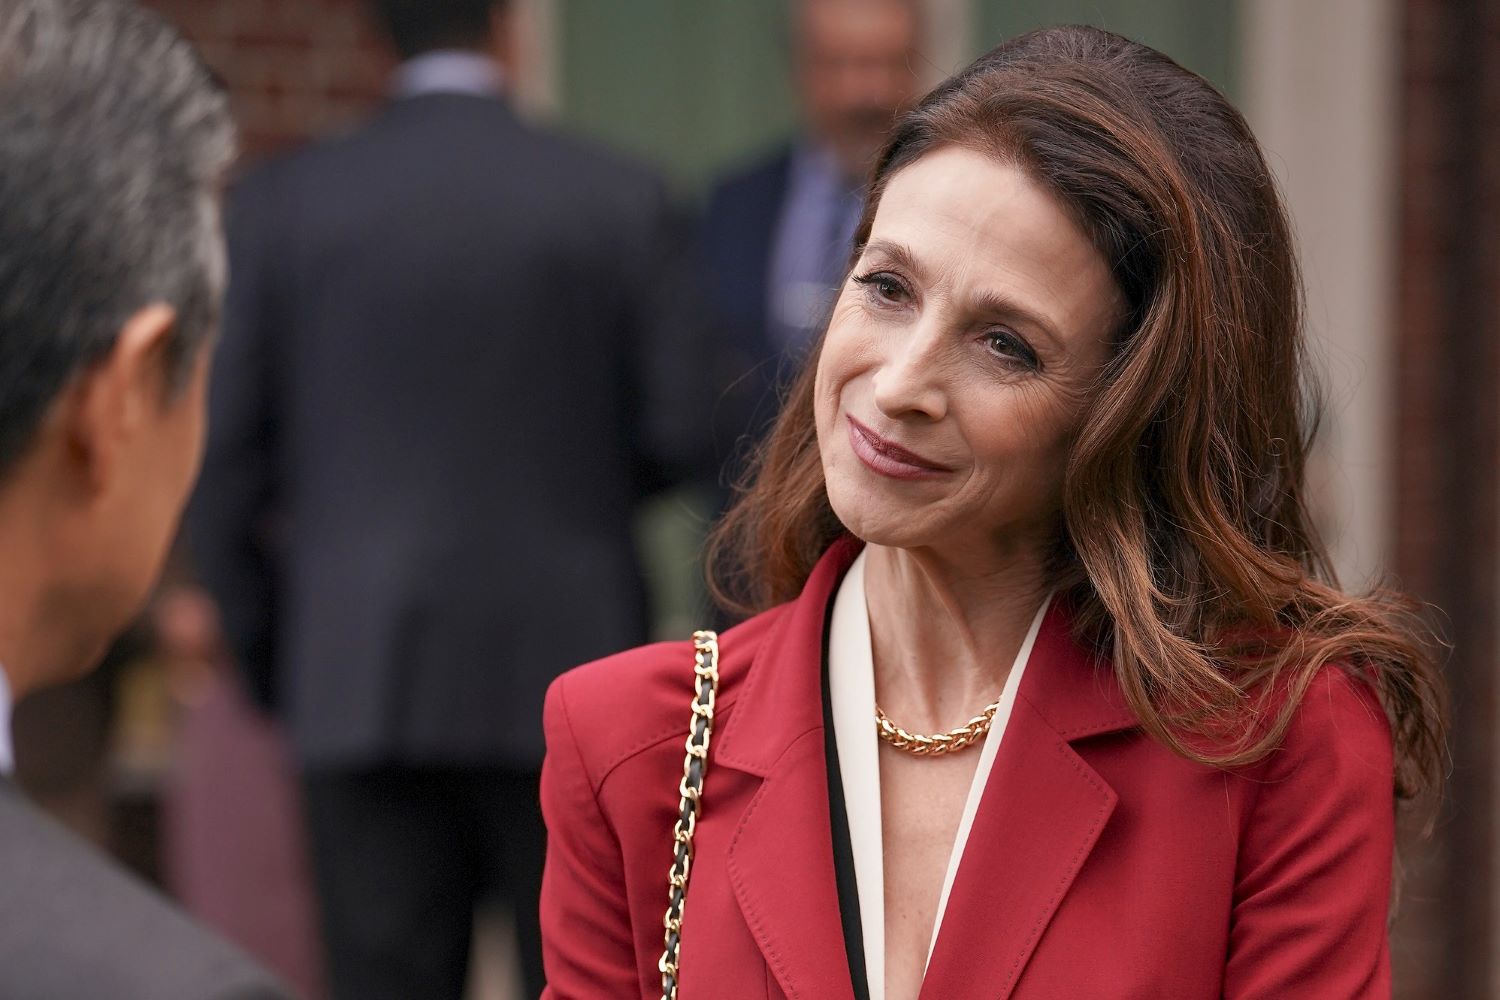 Marin Hinkle as Claire Fox in 'The Company You Keep' Season 1 Episode 4, 'All In.'